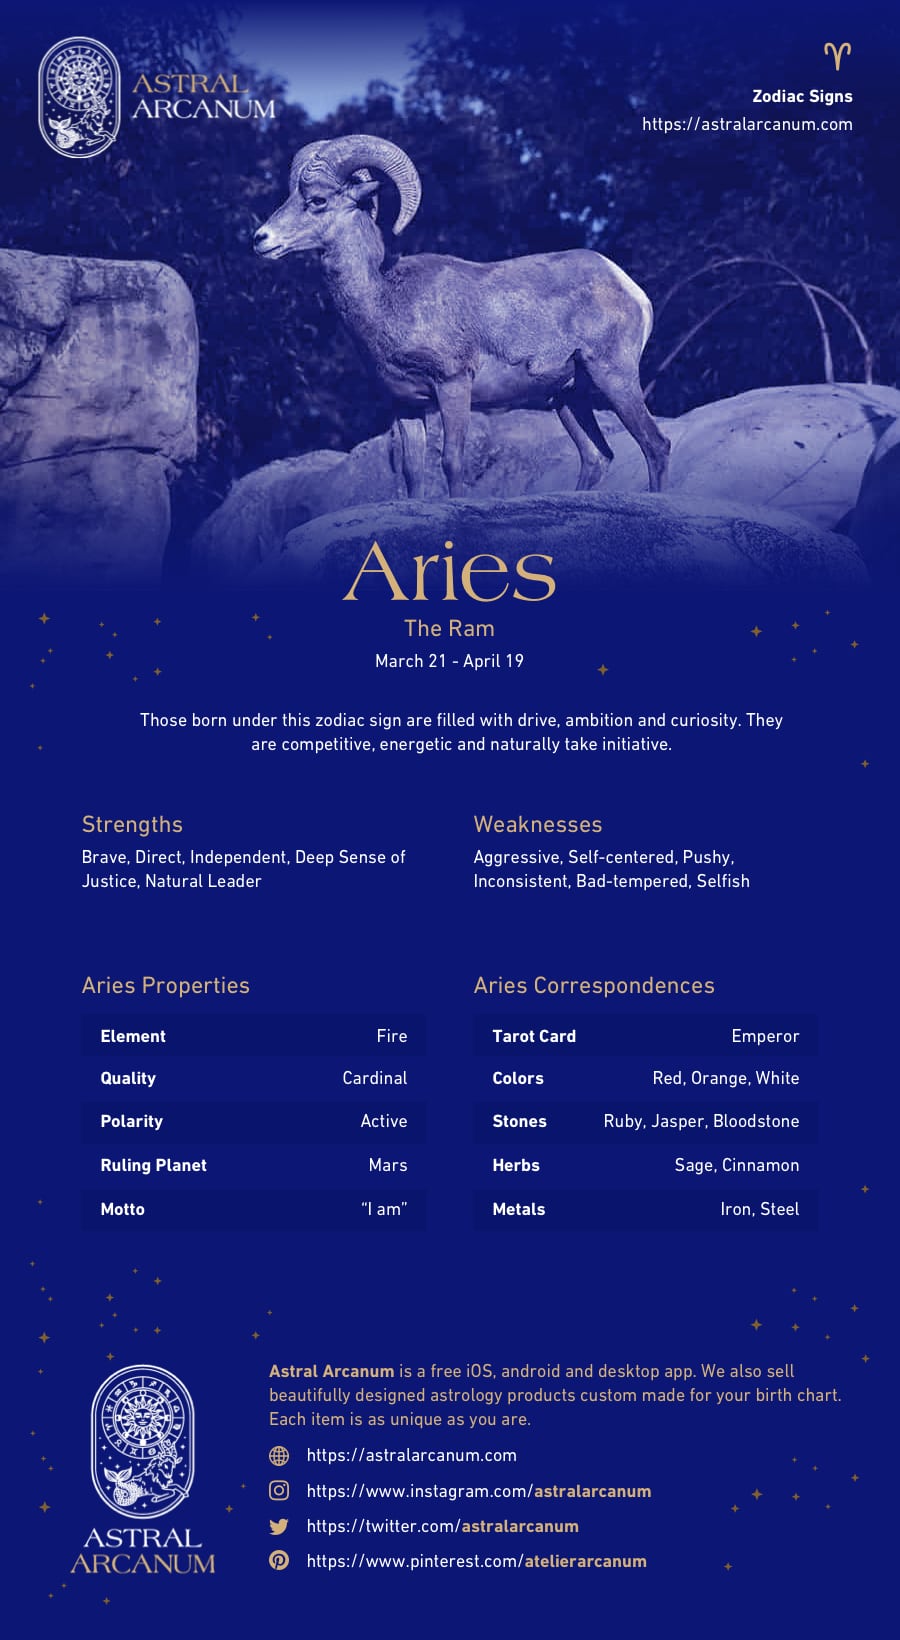 Astrology Zodiac Sign Aries Infographic - Aries Personality, Aries Careers, Aries Work, Aries Correspondences